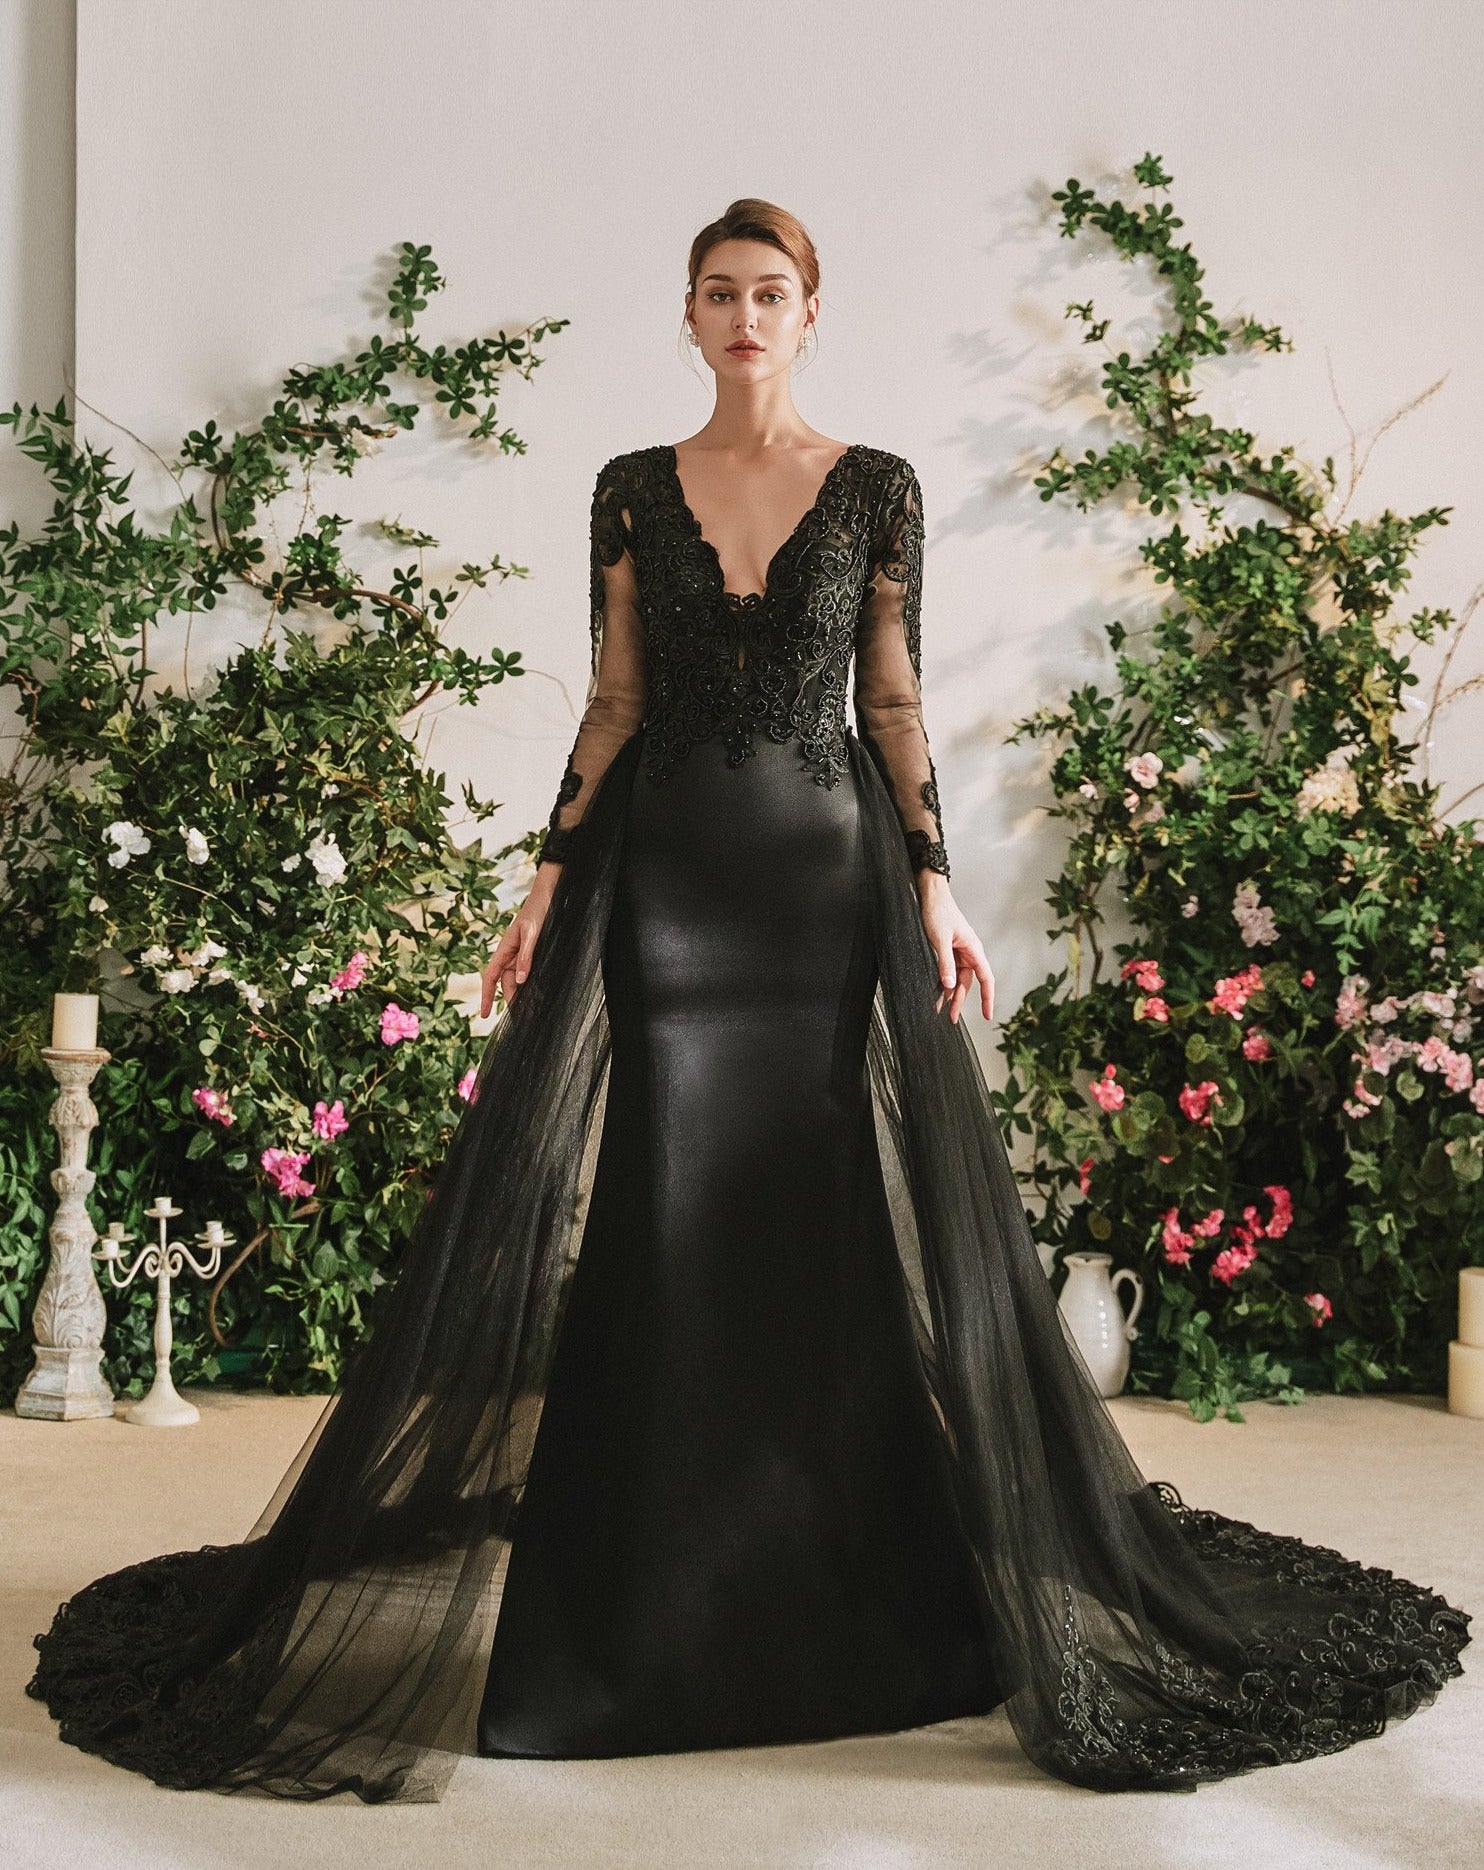 Black and Purple Wedding Dress with Cape | Brides & Tailor